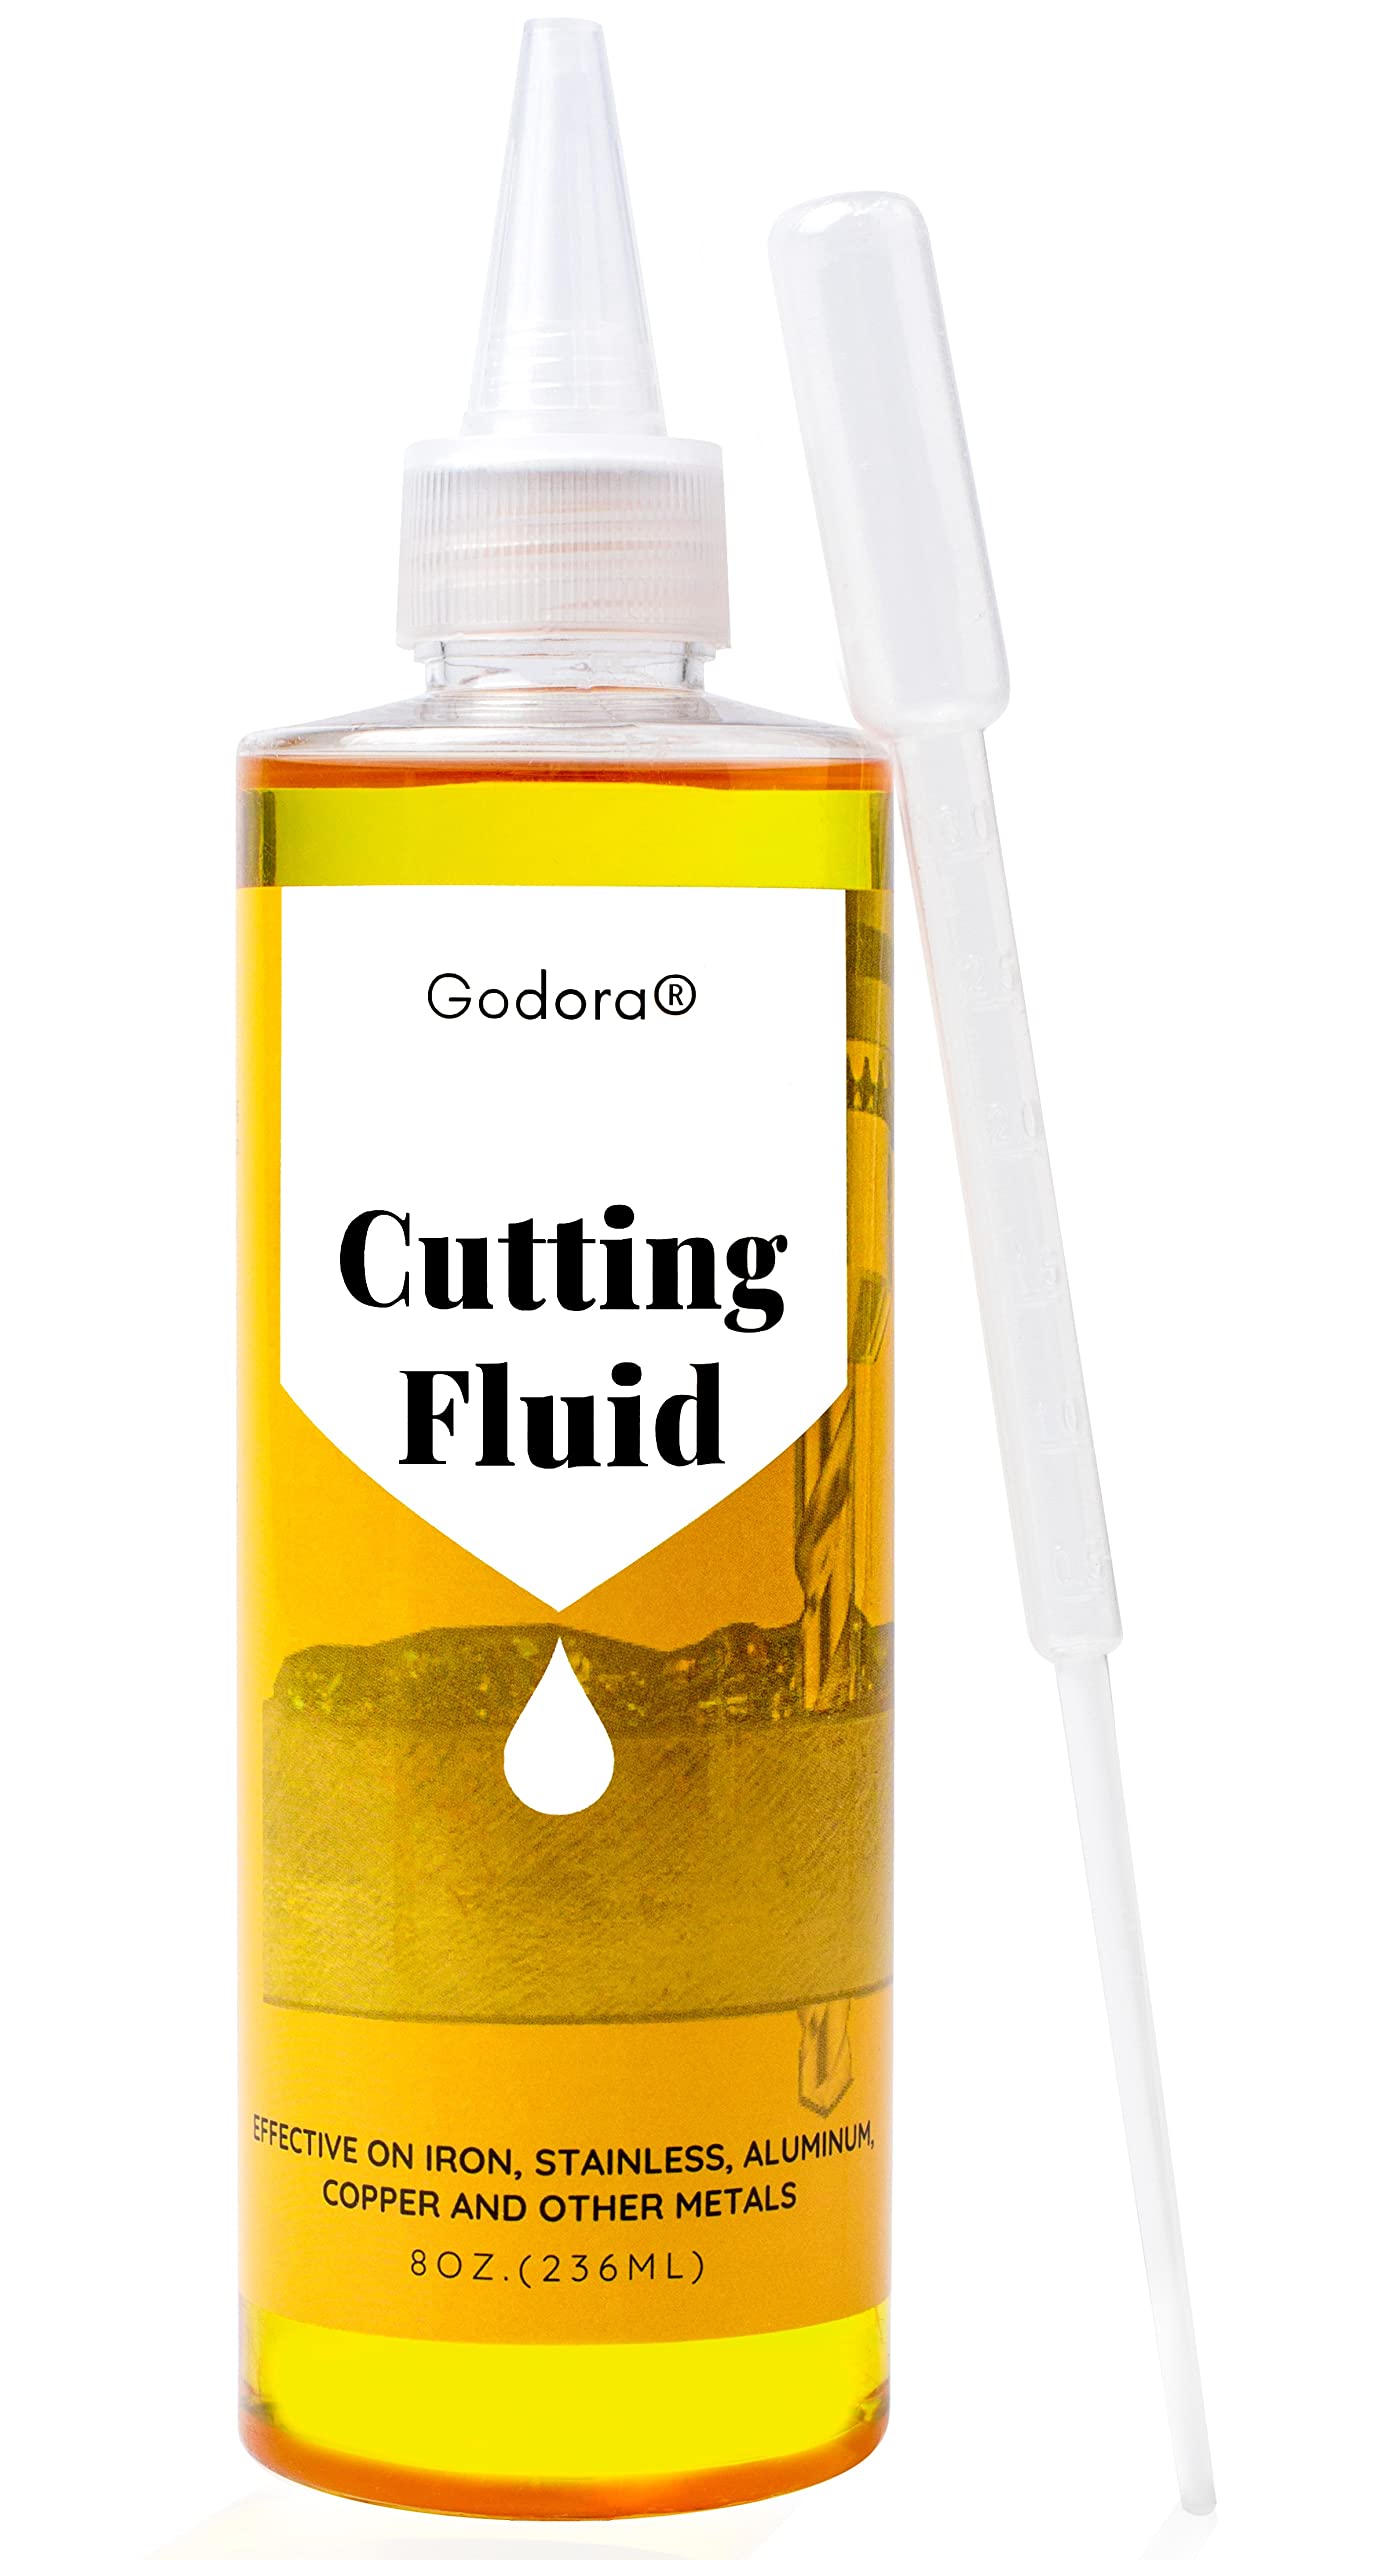 8 OZ Industrial Pro Cutting Oil | Premium Cutting Fluid for Drilling, Tapping, Milling | Cutting Oil for Drilling Metal Such as Iron, Stainless Steel, Copper, Aluminum and More